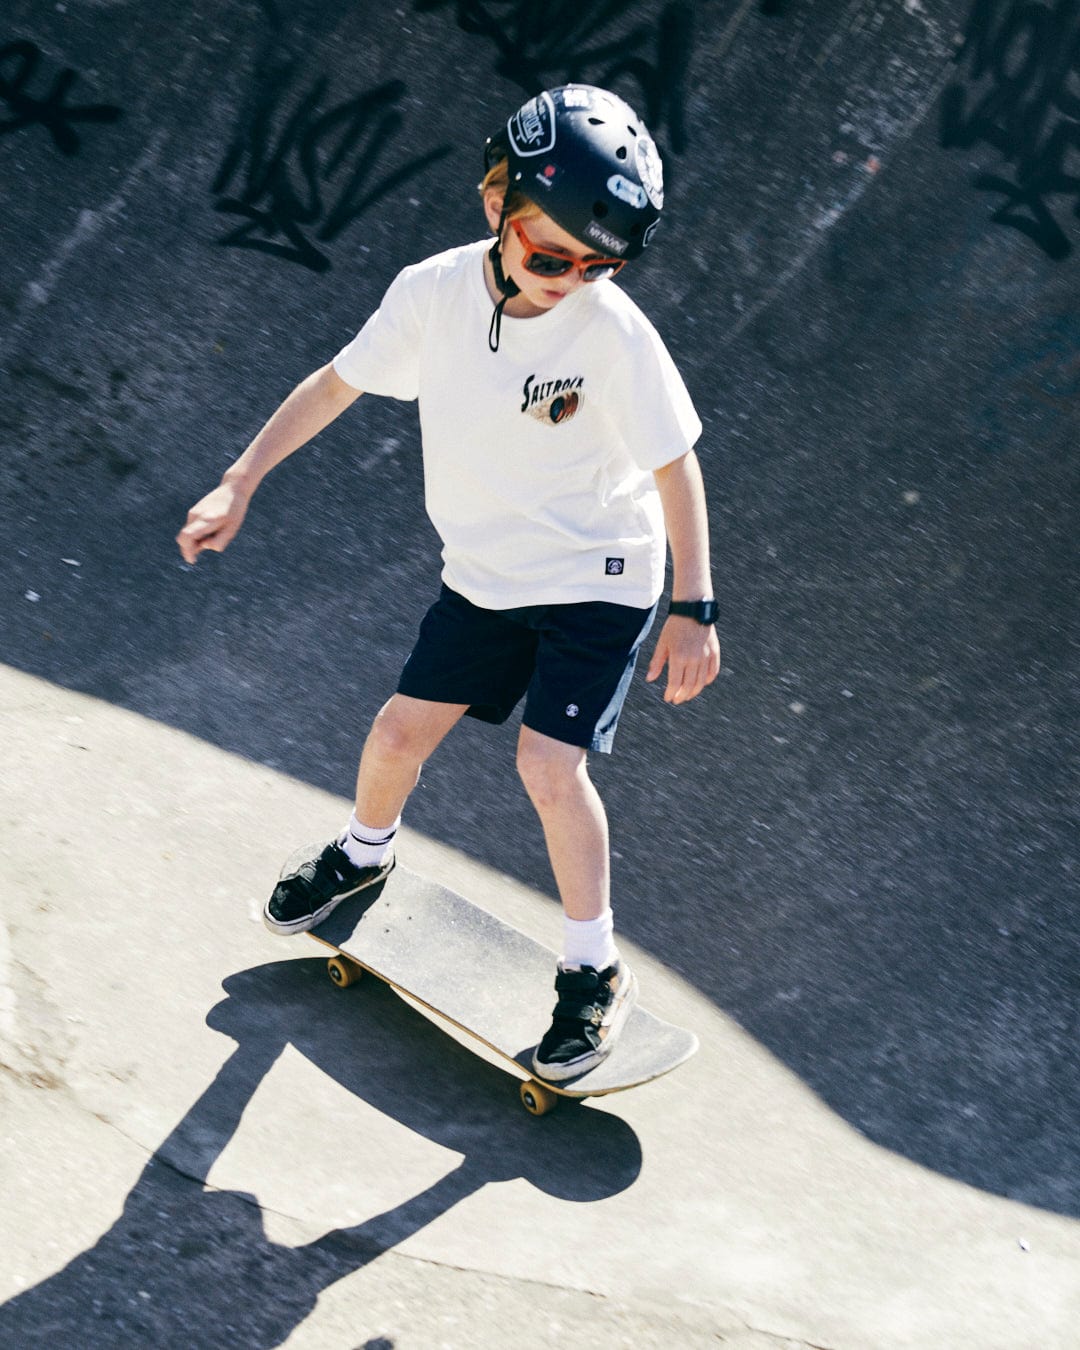 A young boy, wearing a helmet, sunglasses, a white No Road No Problem - Kids Short Sleeve T-Shirt - White from Saltrock that's machine washable, and shorts, skateboards in a skate park.